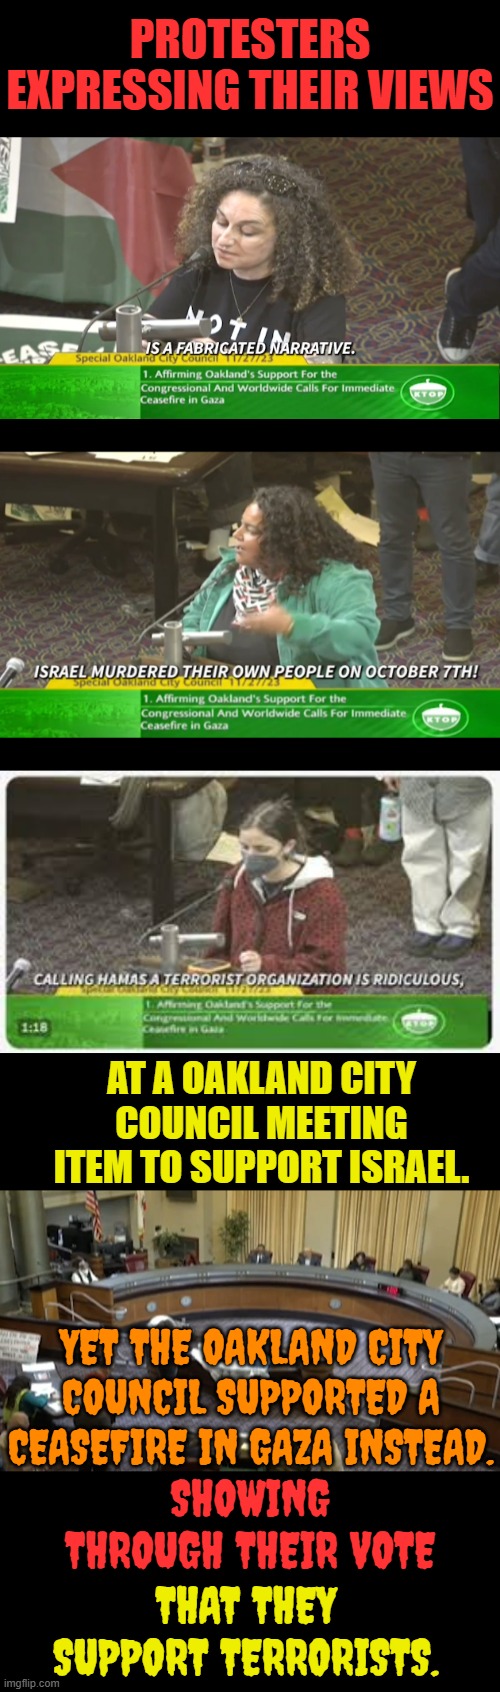 Here We Go | PROTESTERS EXPRESSING THEIR VIEWS; AT A OAKLAND CITY COUNCIL MEETING ITEM TO SUPPORT ISRAEL. YET THE OAKLAND CITY COUNCIL SUPPORTED A CEASEFIRE IN GAZA INSTEAD. SHOWING THROUGH THEIR VOTE; THAT THEY SUPPORT TERRORISTS. | image tagged in memes,politics,california,vote,support,terrorists | made w/ Imgflip meme maker